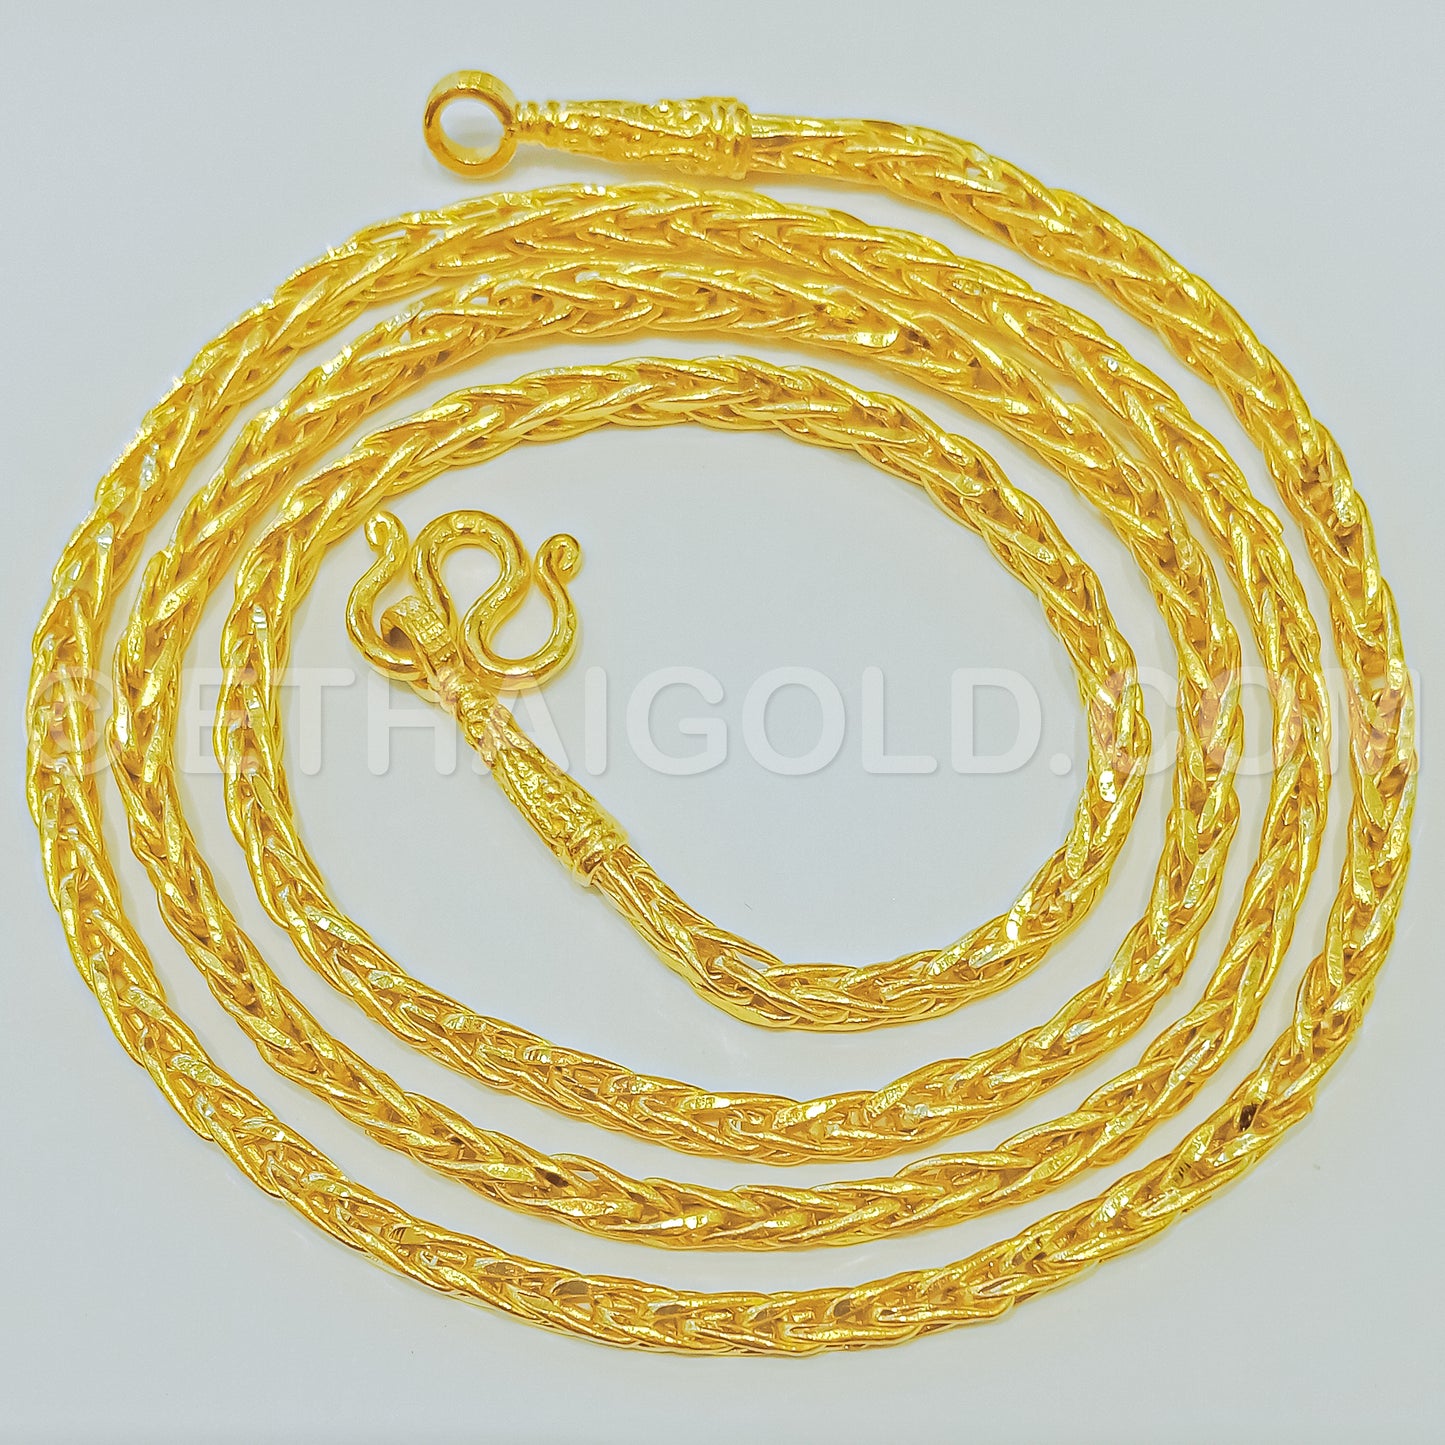 5 BAHT POLISHED DIAMOND-CUT HOLLOW SQUARE WHEAT CHAIN NECKLACE IN 23K GOLD (ID: N1405B)